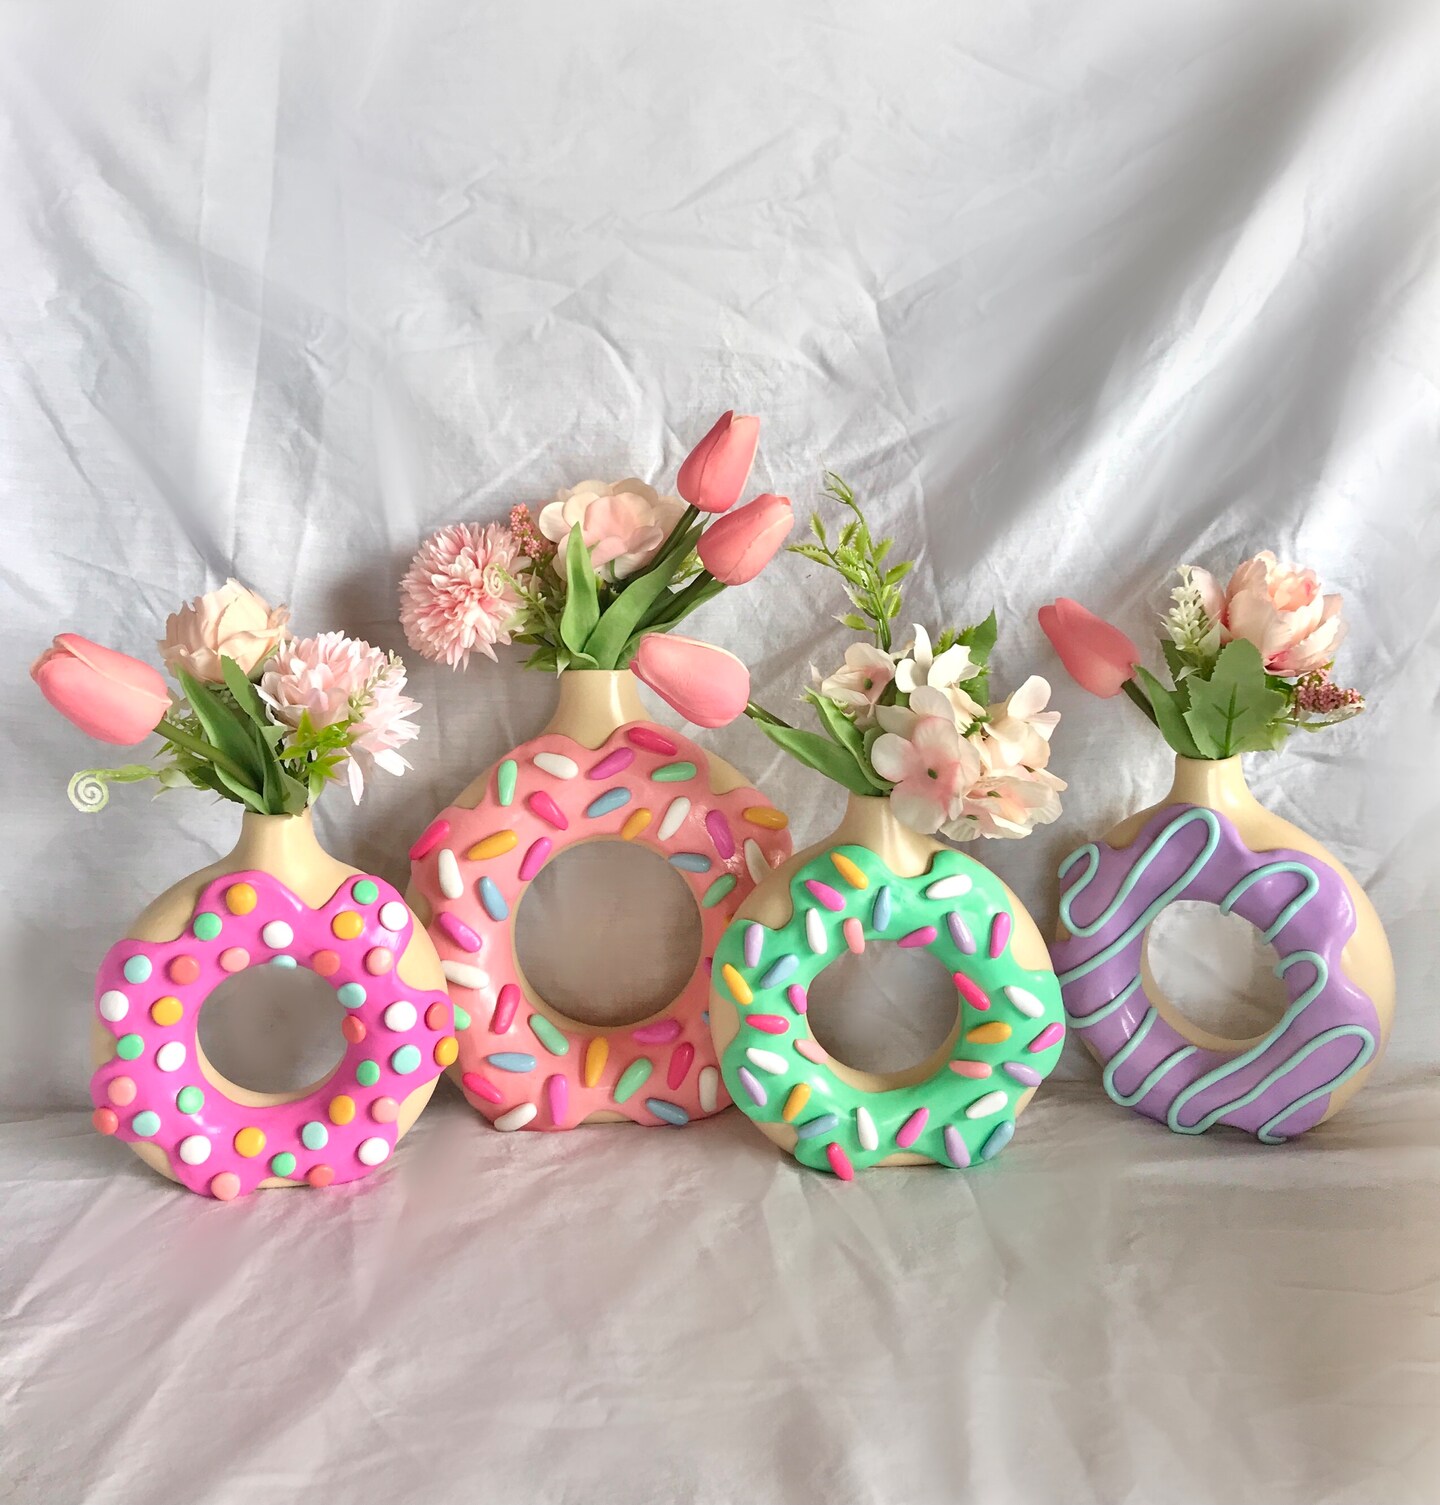 Donut Vase, Doughnut Vase, Cute Decor, Colorful Home Decor, Sprinkles Icing Frosting Frosted Donut Vases, Quirky Kawaii Food Decorations 243592976376627200